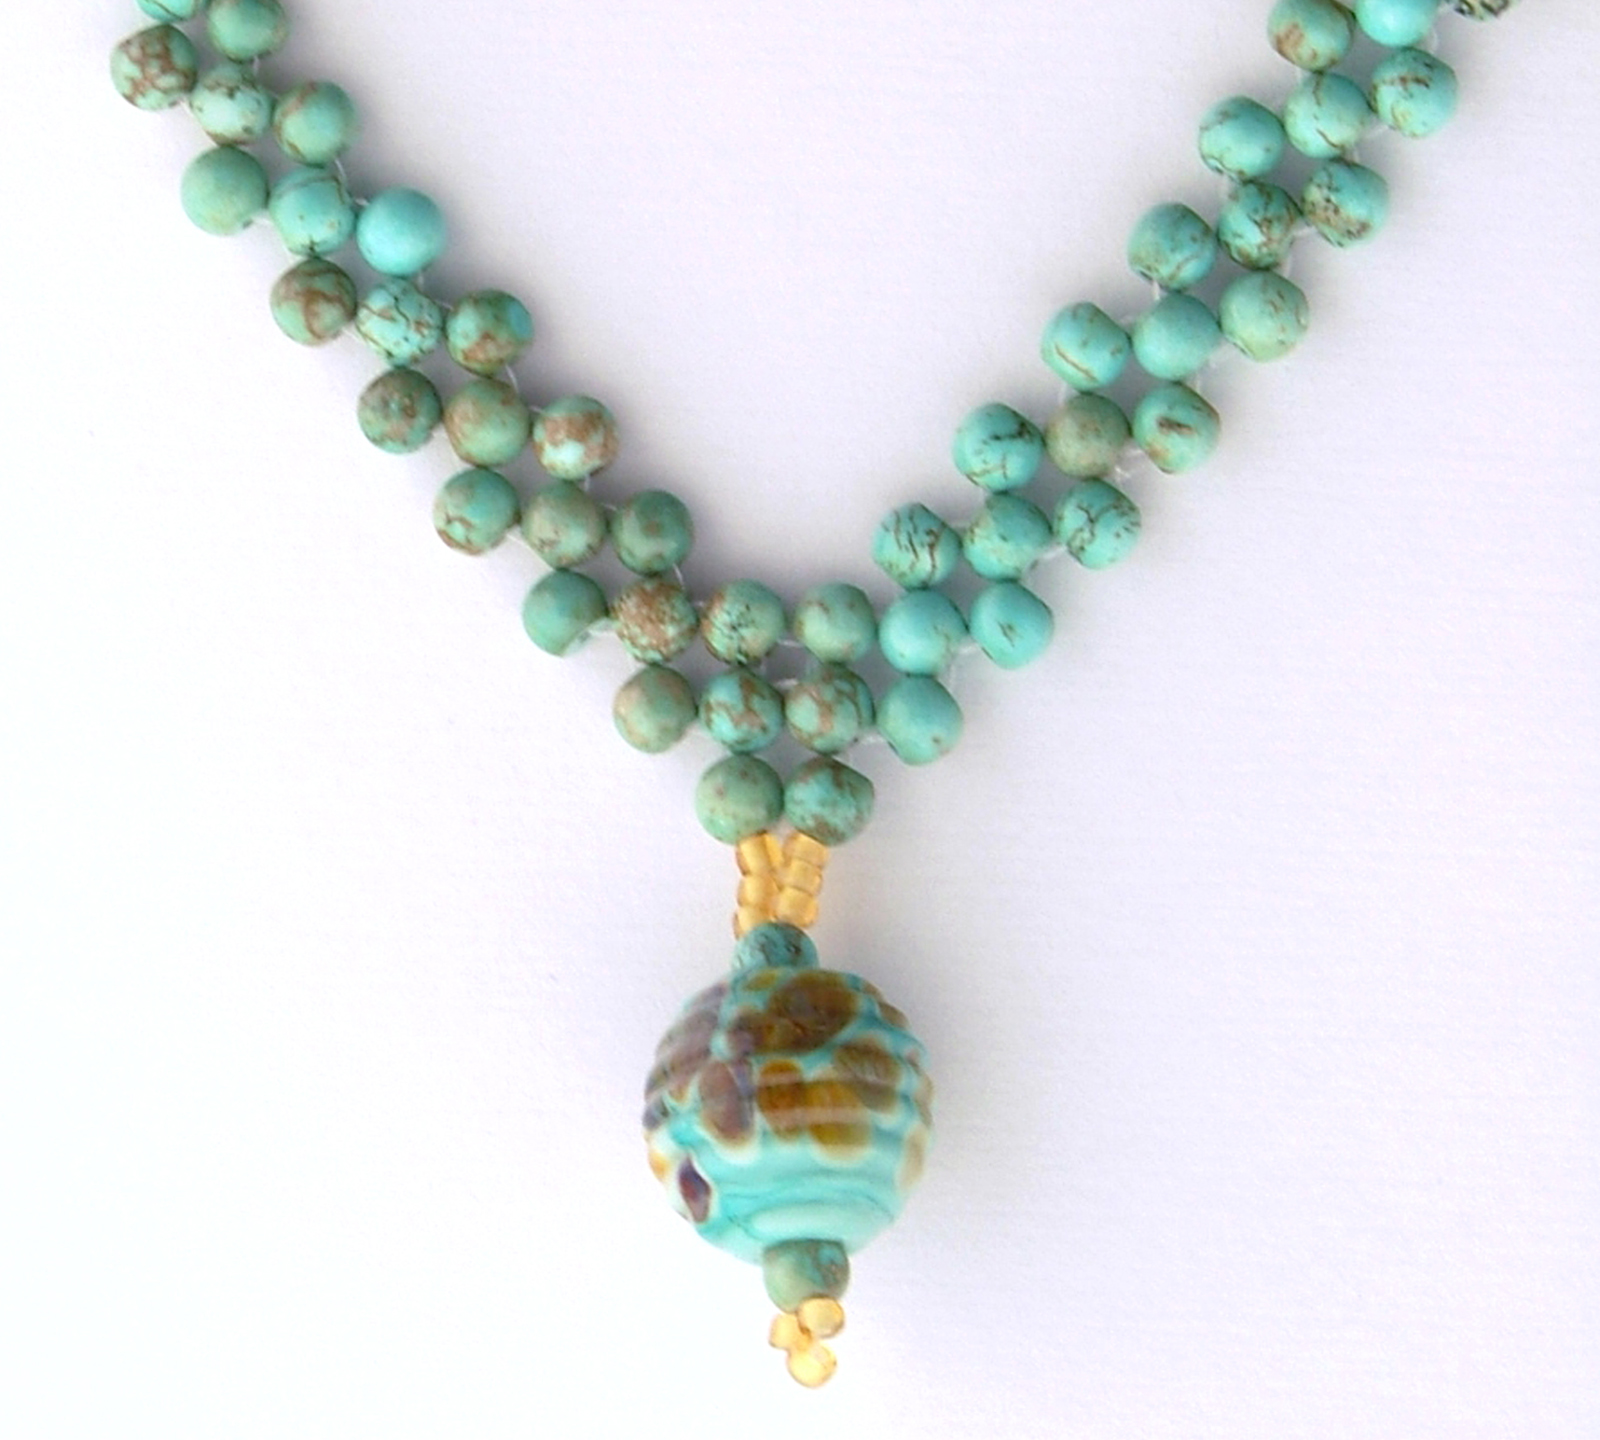 BeadsongJewelry: Fresh From the Bead Table